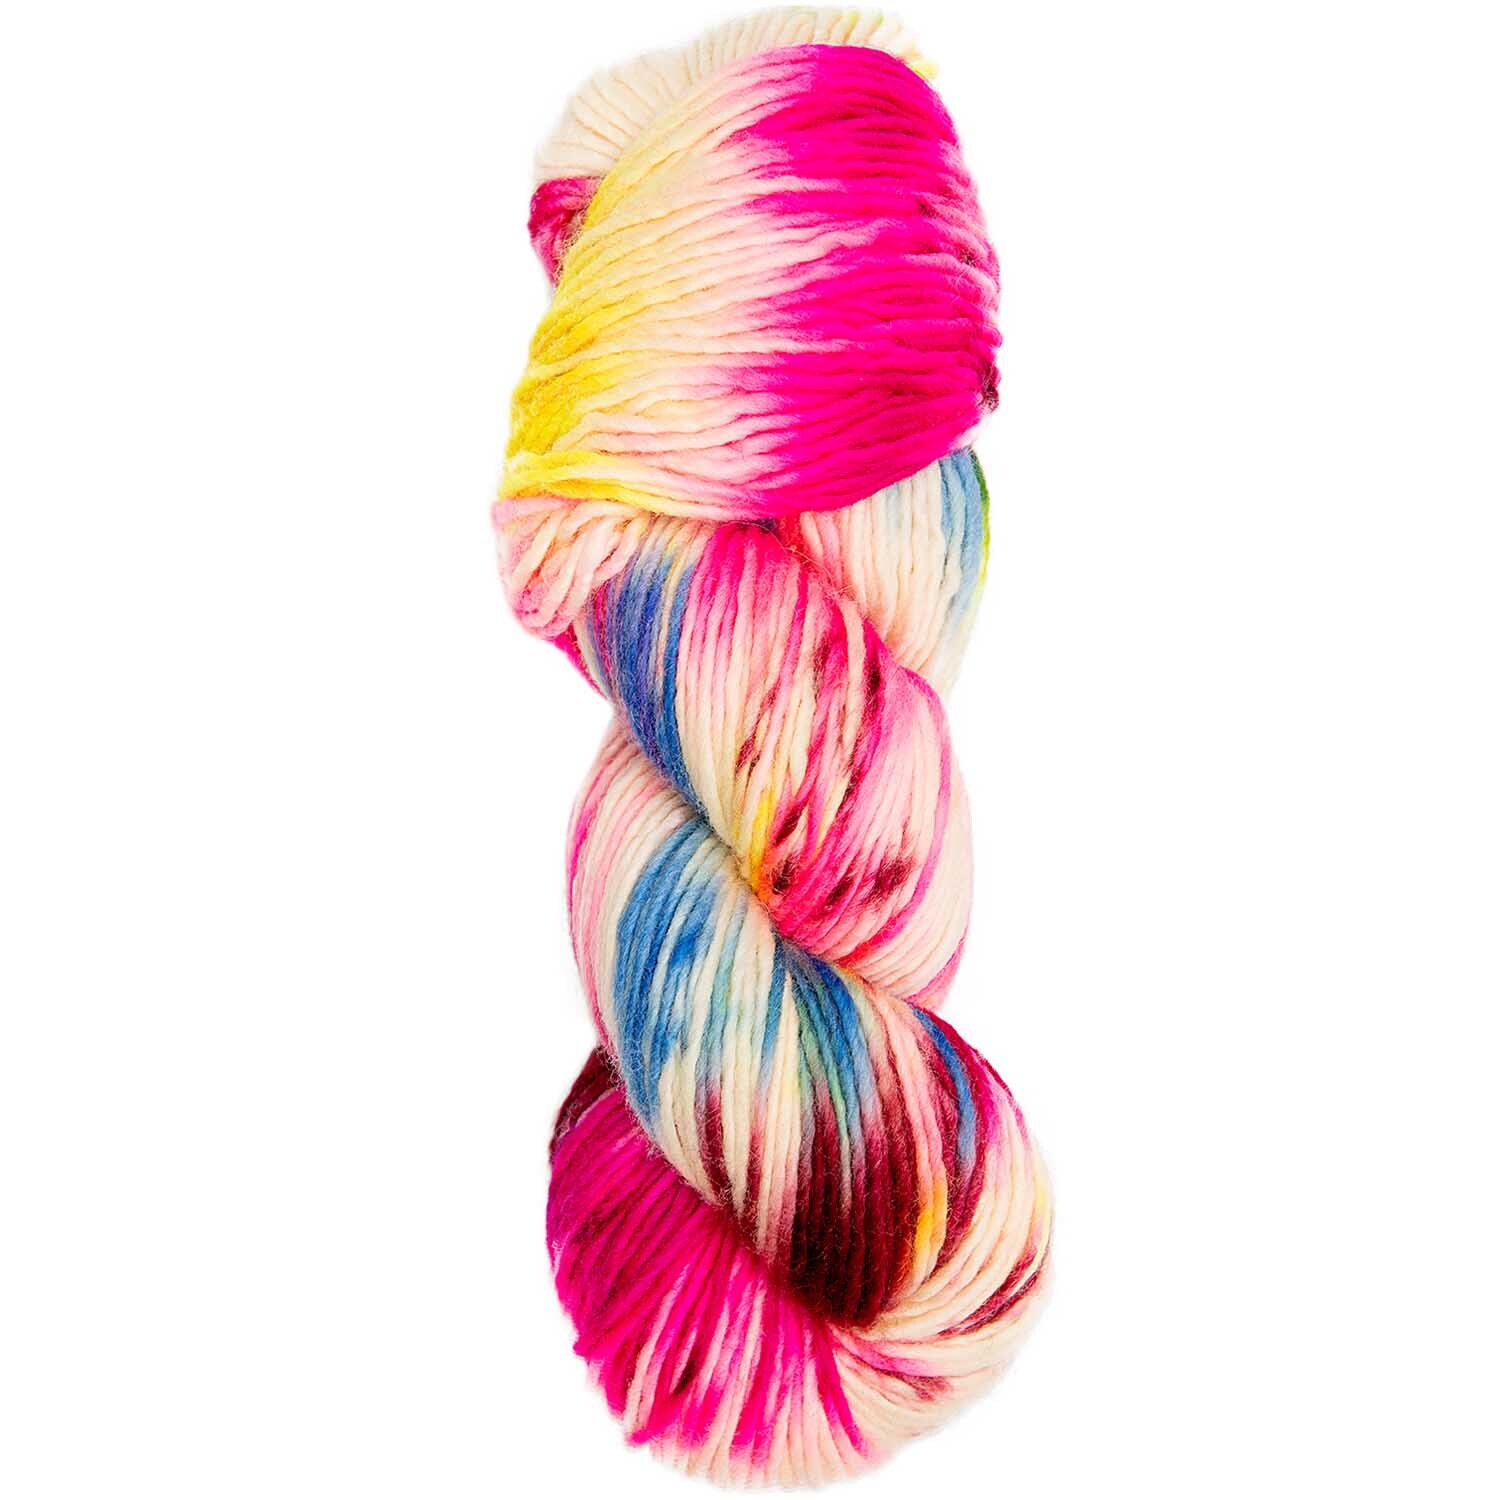 Luxury Hand-Dyed Happiness chunky